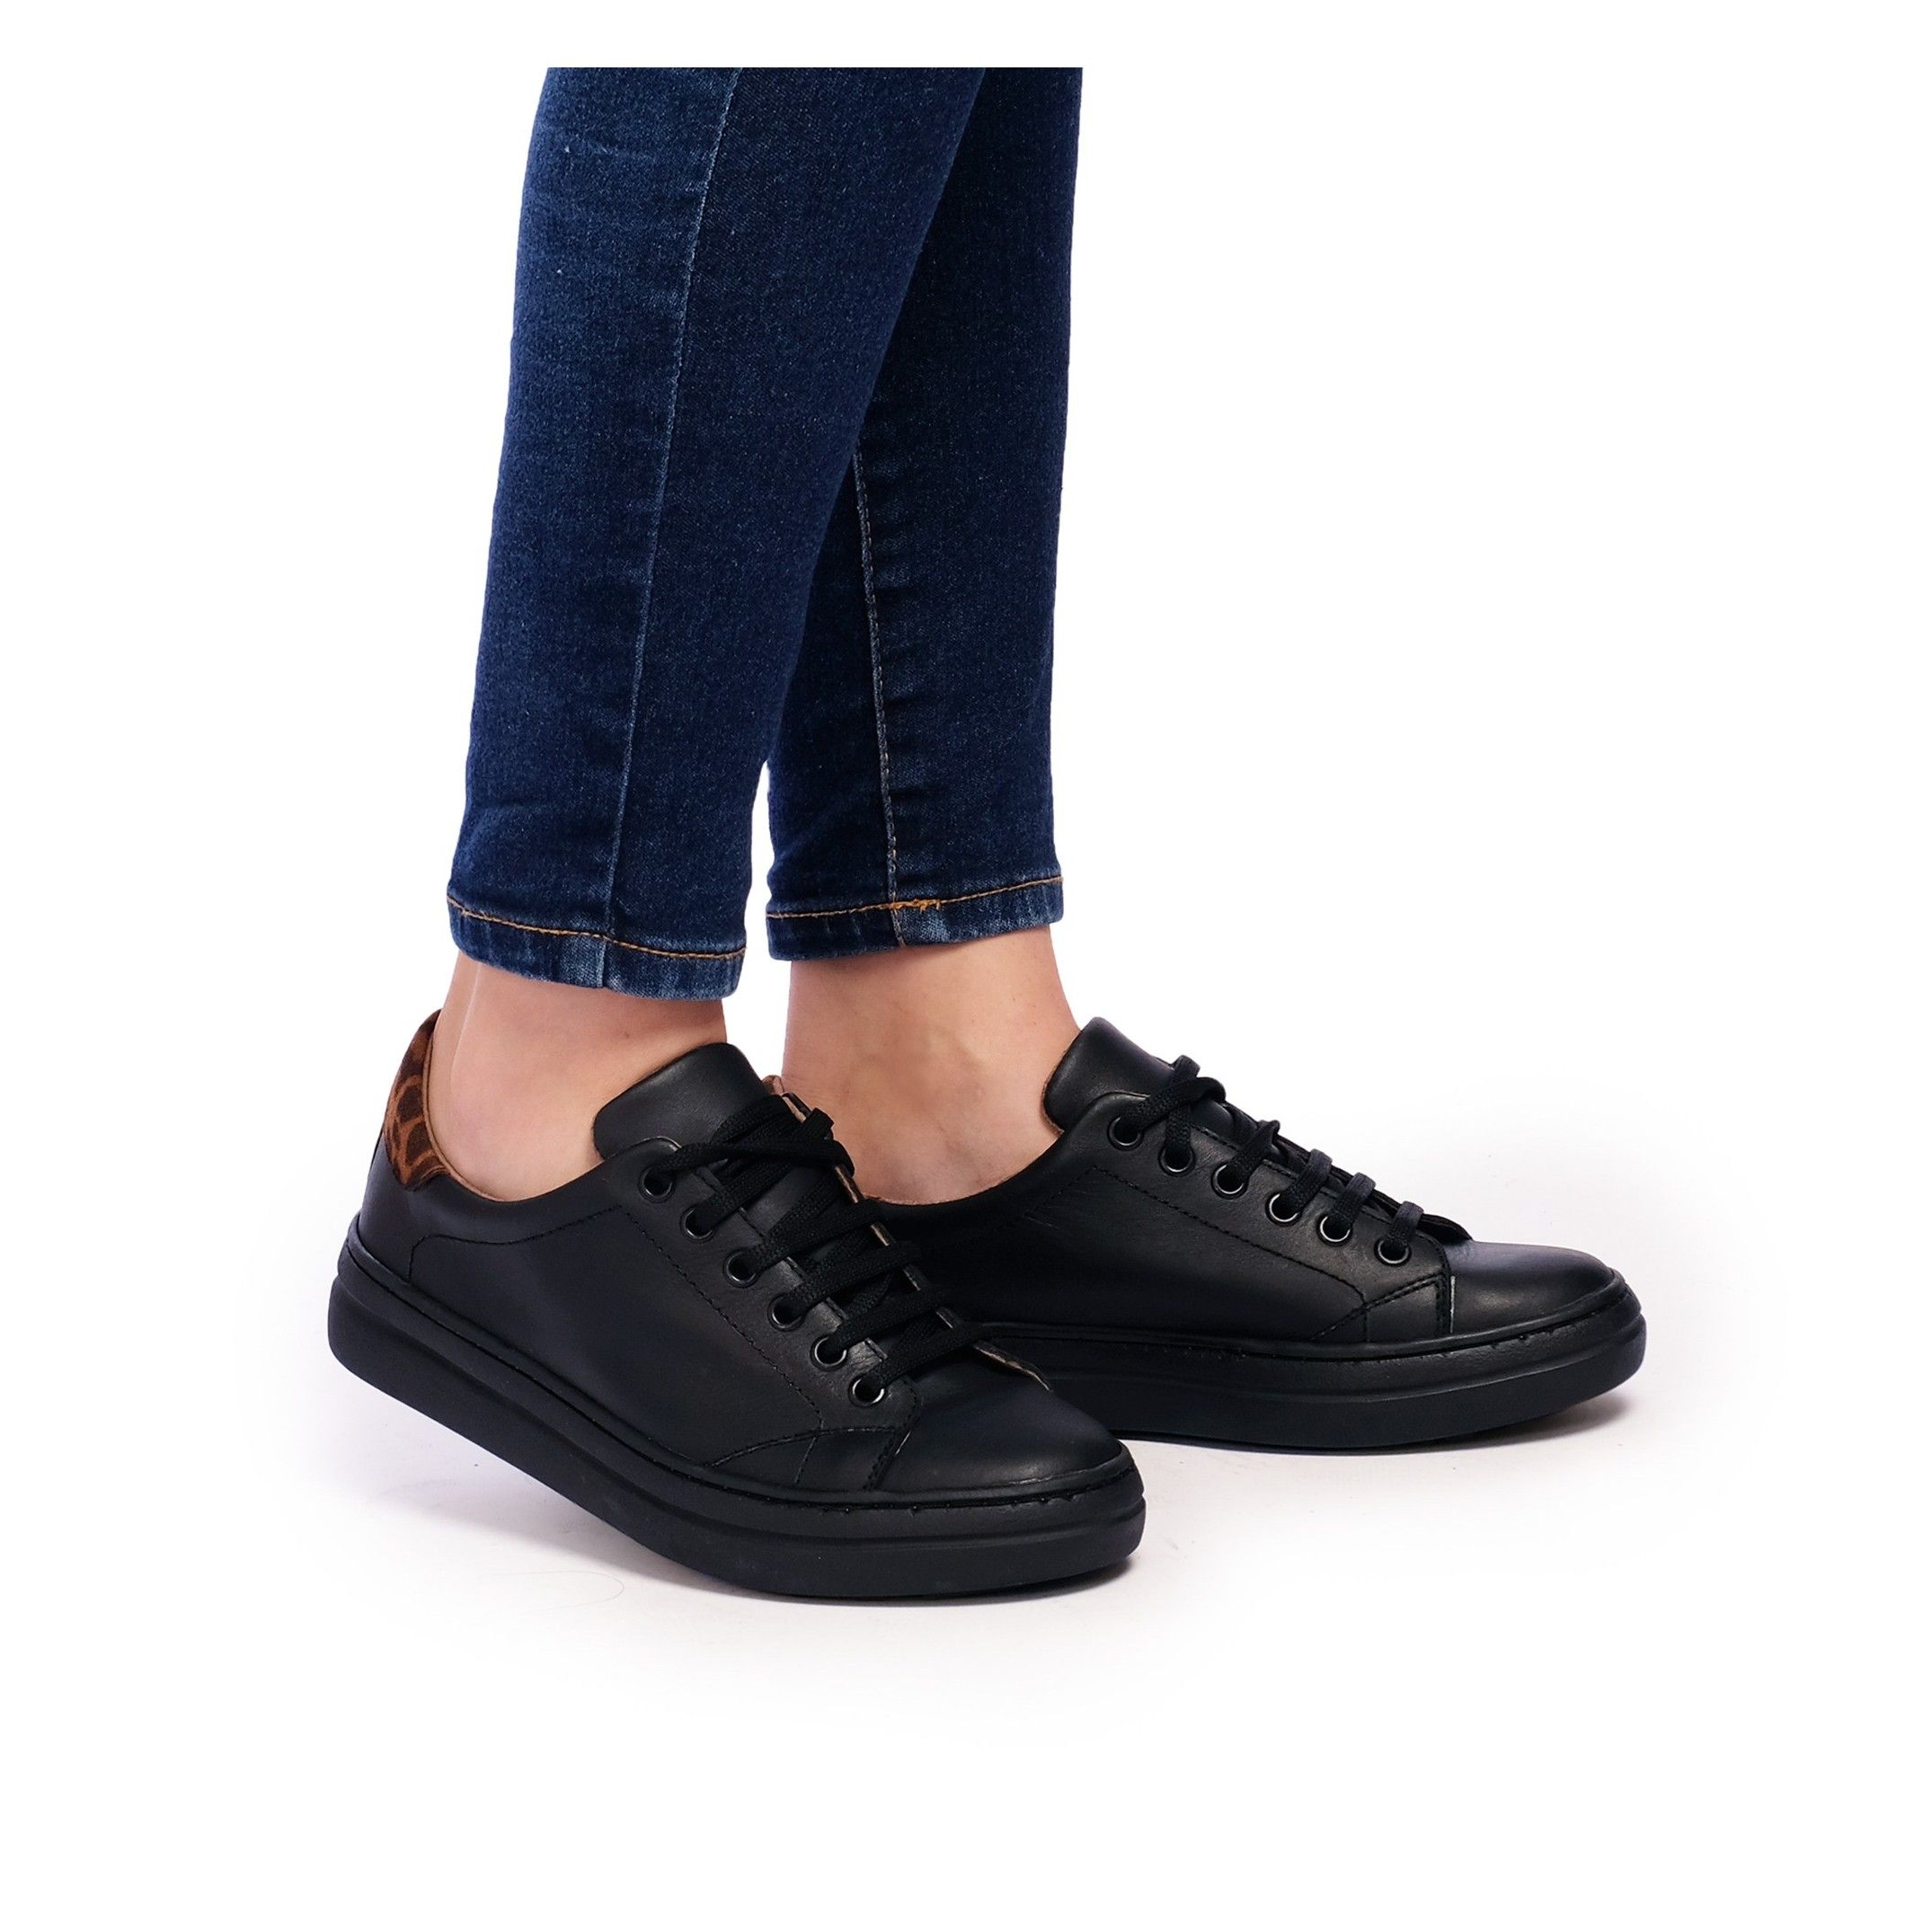 Leather sneakers with laces for women. Upper, inner and insole made of leather. Laces closure. Made in Spain.